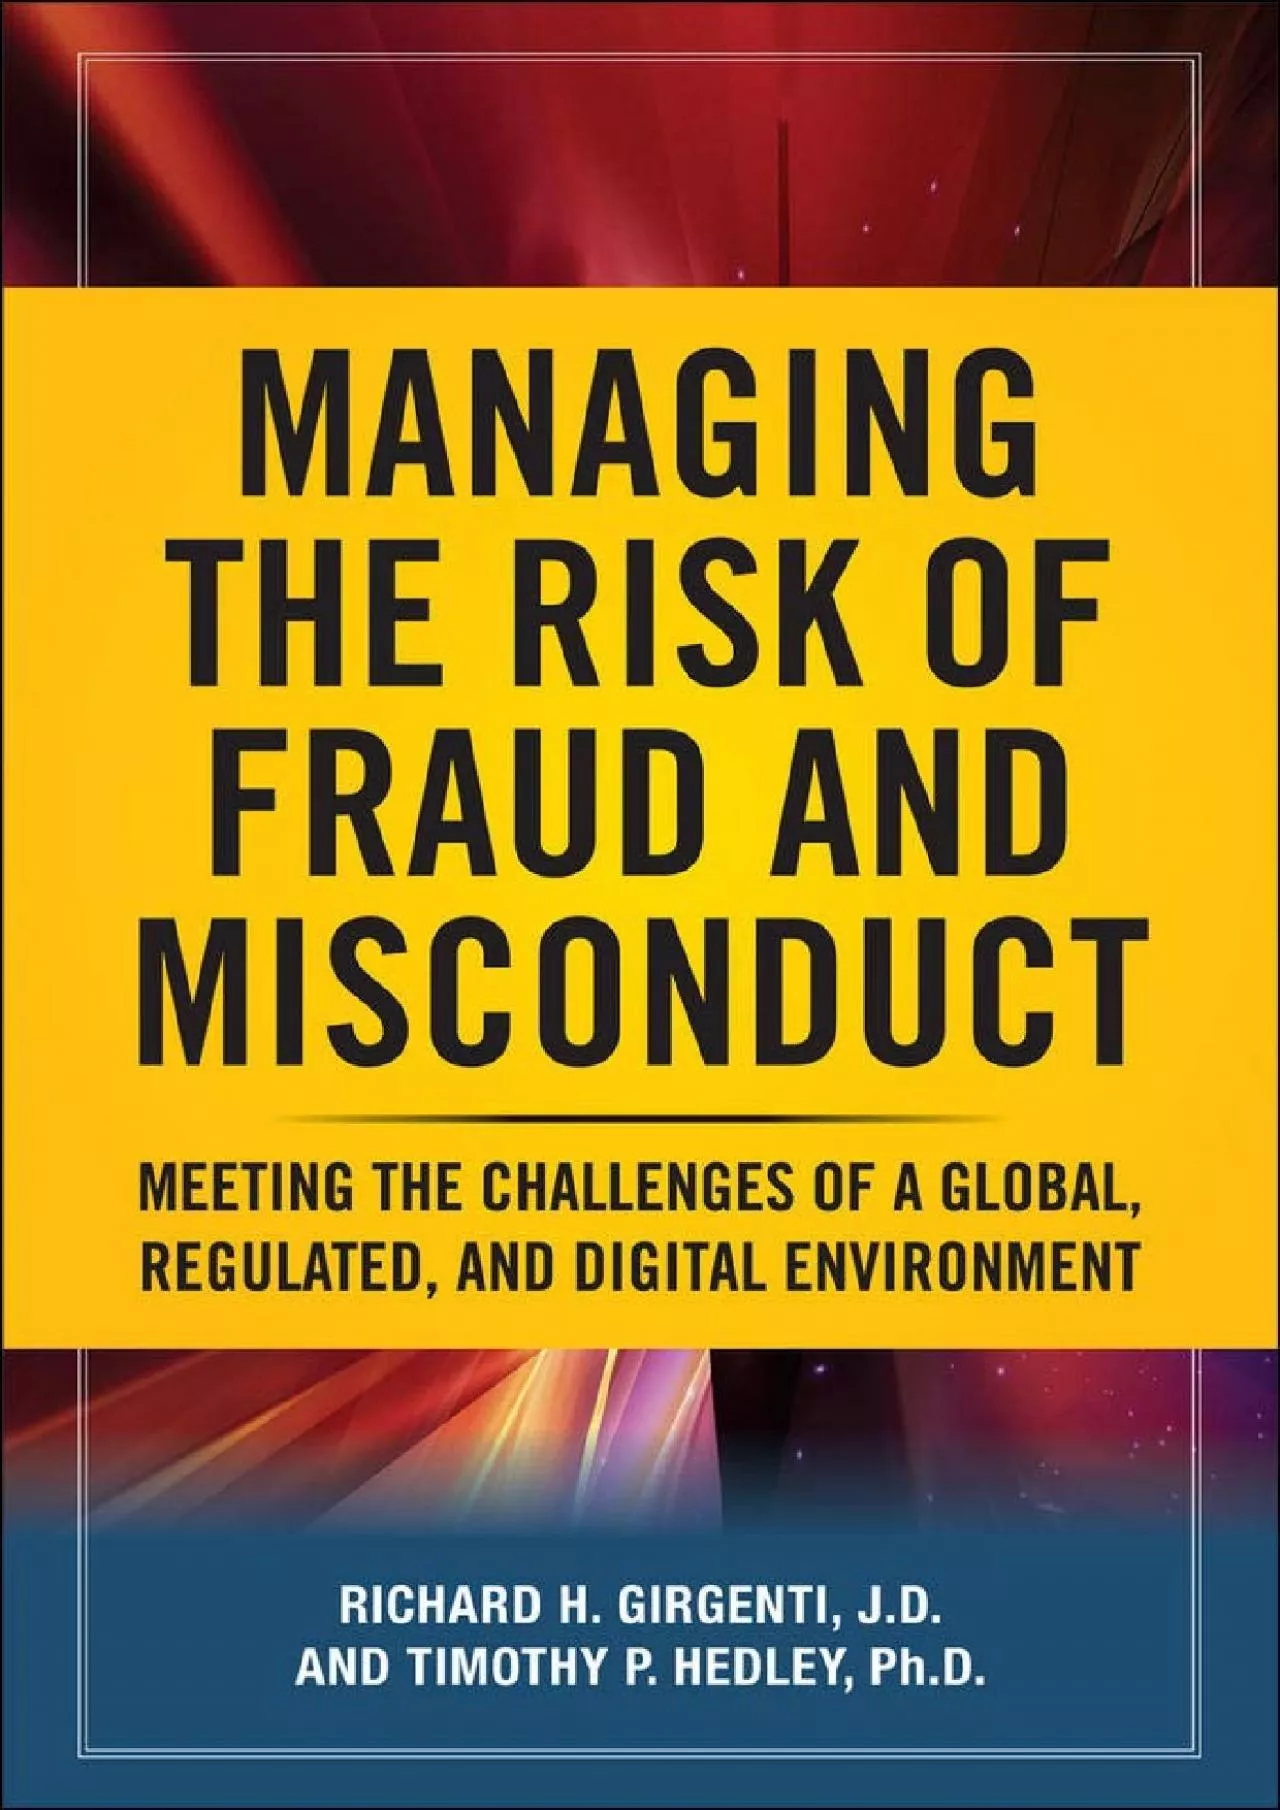 (DOWNLOAD)-Managing the Risk of Fraud and Misconduct: Meeting the Challenges of a Global,